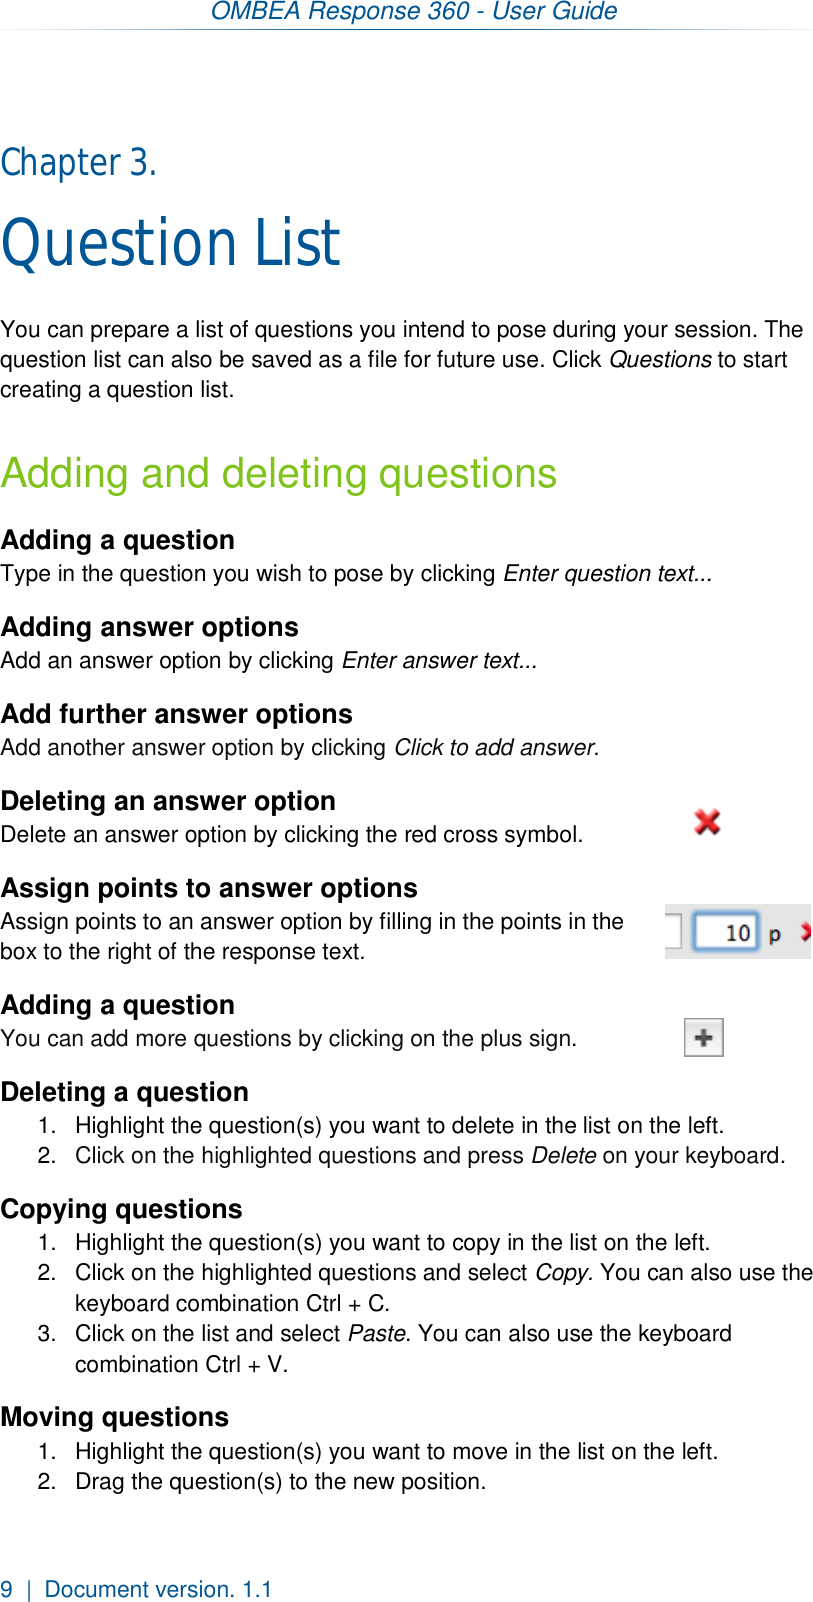 OMBEA Response 360 - User Guide  9  |  Document version. 1.1 Chapter 3.  Question List You can prepare a list of questions you intend to pose during your session. The question list can also be saved as a file for future use. Click Questions to start creating a question list. Adding and deleting questions Adding a question Type in the question you wish to pose by clicking Enter question text... Adding answer options Add an answer option by clicking Enter answer text... Add further answer options Add another answer option by clicking Click to add answer.  Deleting an answer option Delete an answer option by clicking the red cross symbol. Assign points to answer options Assign points to an answer option by filling in the points in the box to the right of the response text. Adding a question You can add more questions by clicking on the plus sign. Deleting a question 1.  Highlight the question(s) you want to delete in the list on the left. 2.  Click on the highlighted questions and press Delete on your keyboard.  Copying questions 1.  Highlight the question(s) you want to copy in the list on the left. 2.  Click on the highlighted questions and select Copy. You can also use the keyboard combination Ctrl + C. 3.  Click on the list and select Paste. You can also use the keyboard combination Ctrl + V. Moving questions 1.  Highlight the question(s) you want to move in the list on the left. 2.  Drag the question(s) to the new position.   